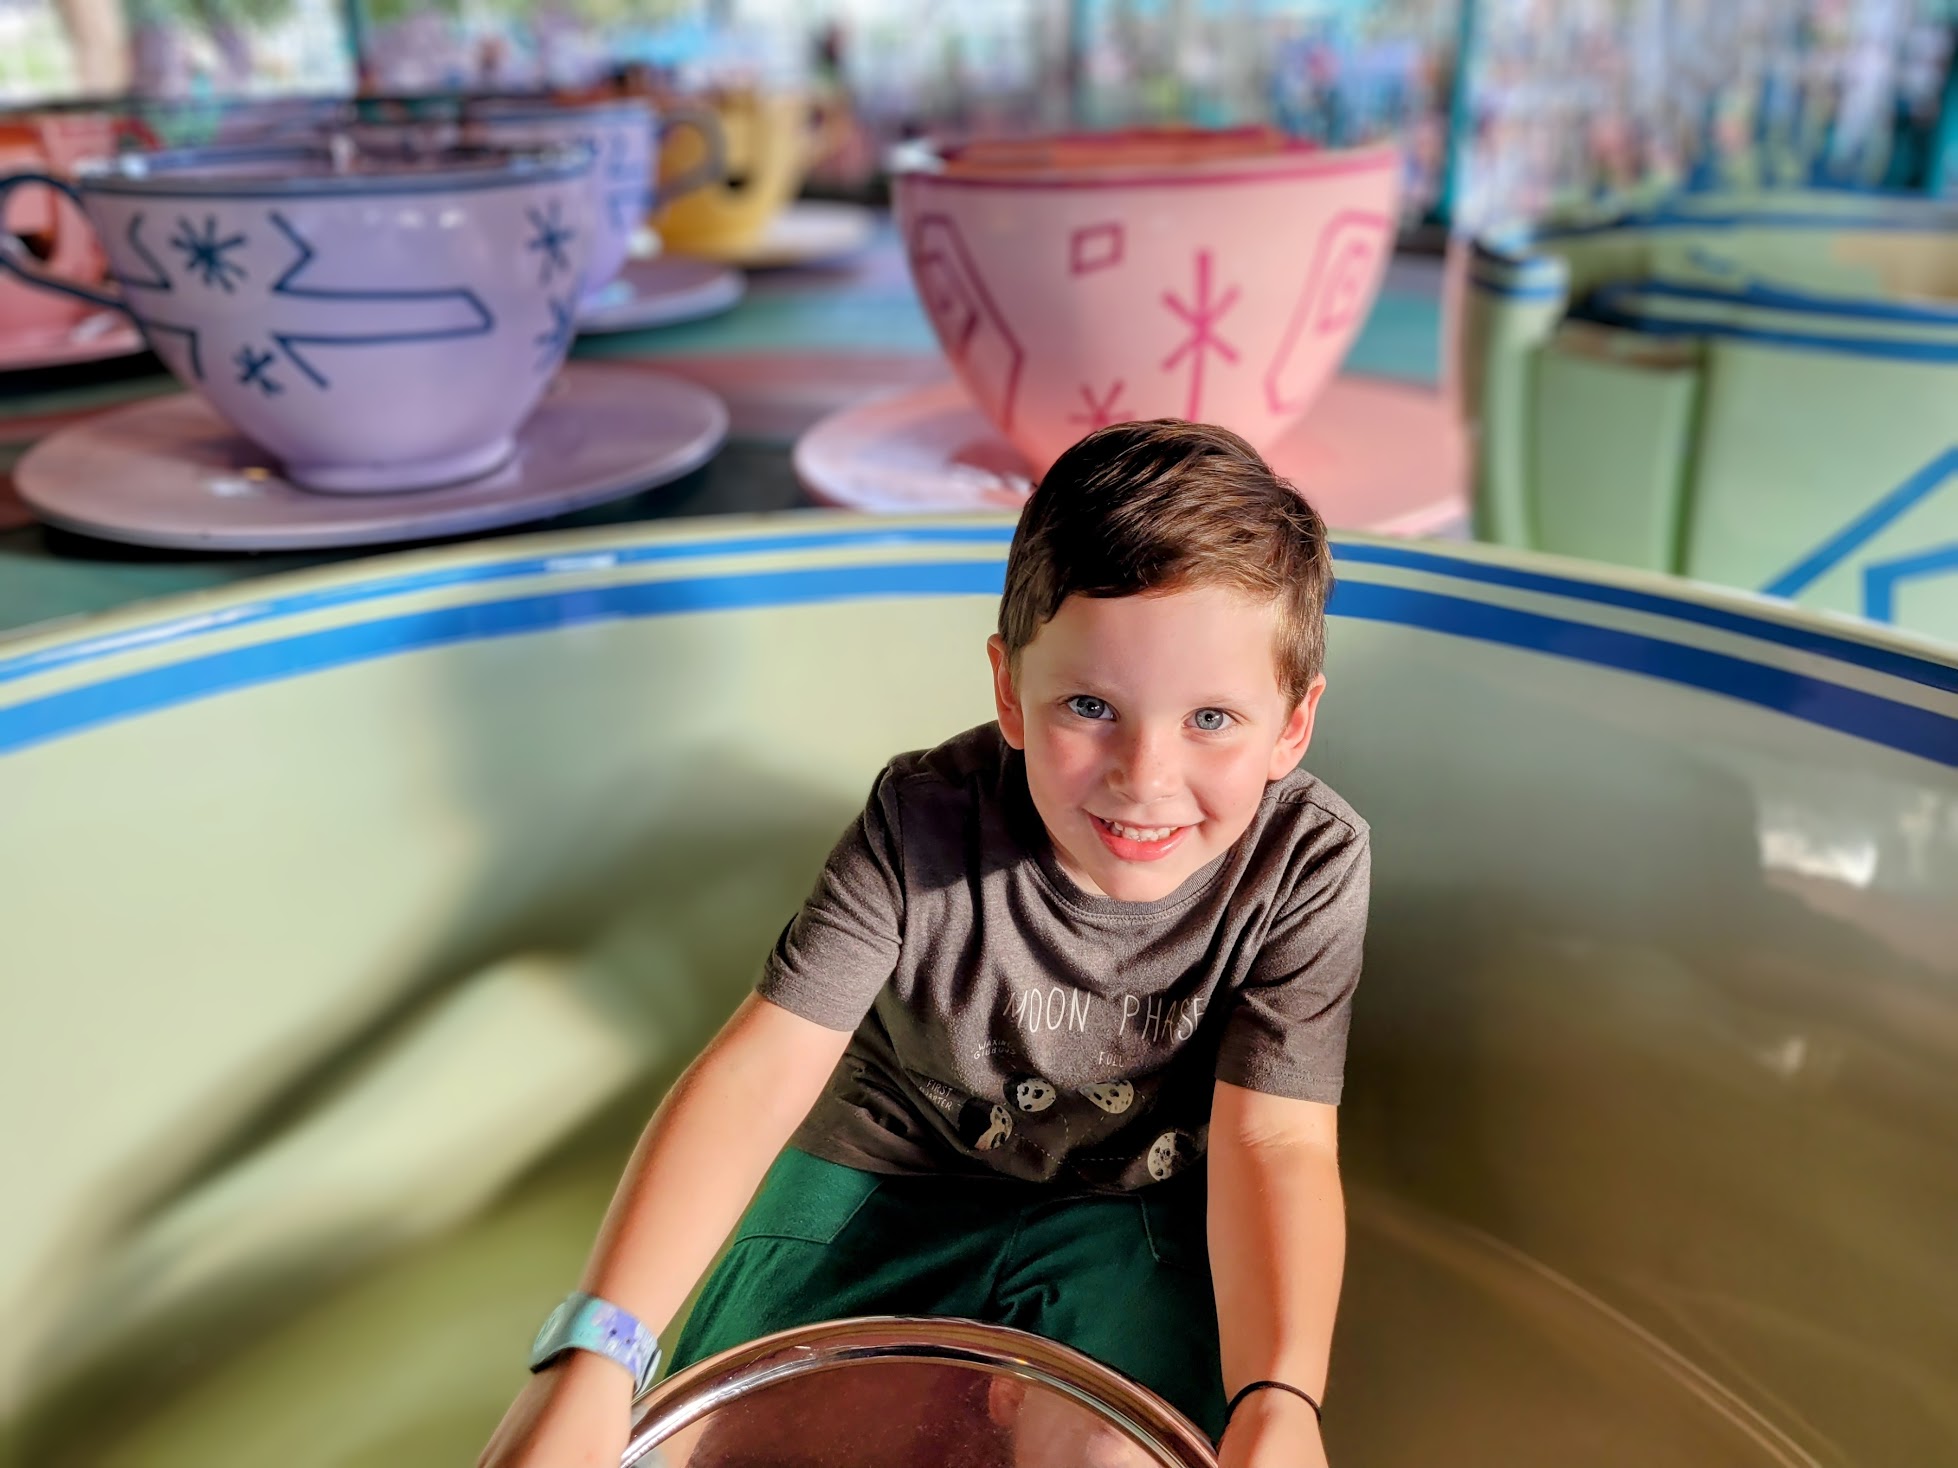 The 5 Best Rides In Magic Kingdom For Kids - According To A 5 Year Old -  DVC Shop